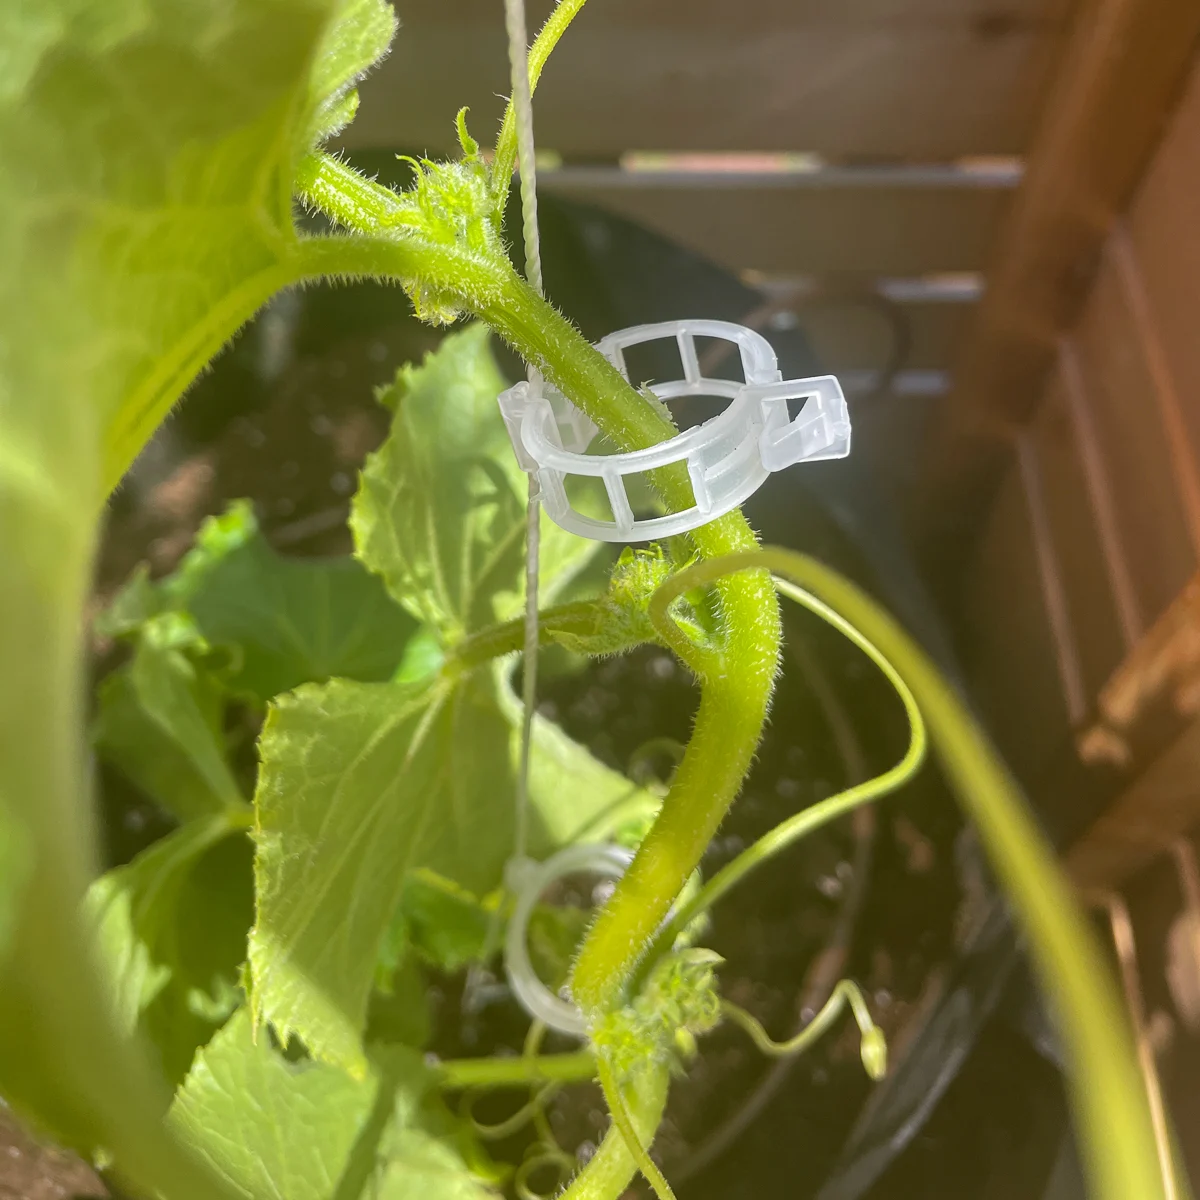 clips on string trellis holding the cucumber vine in place